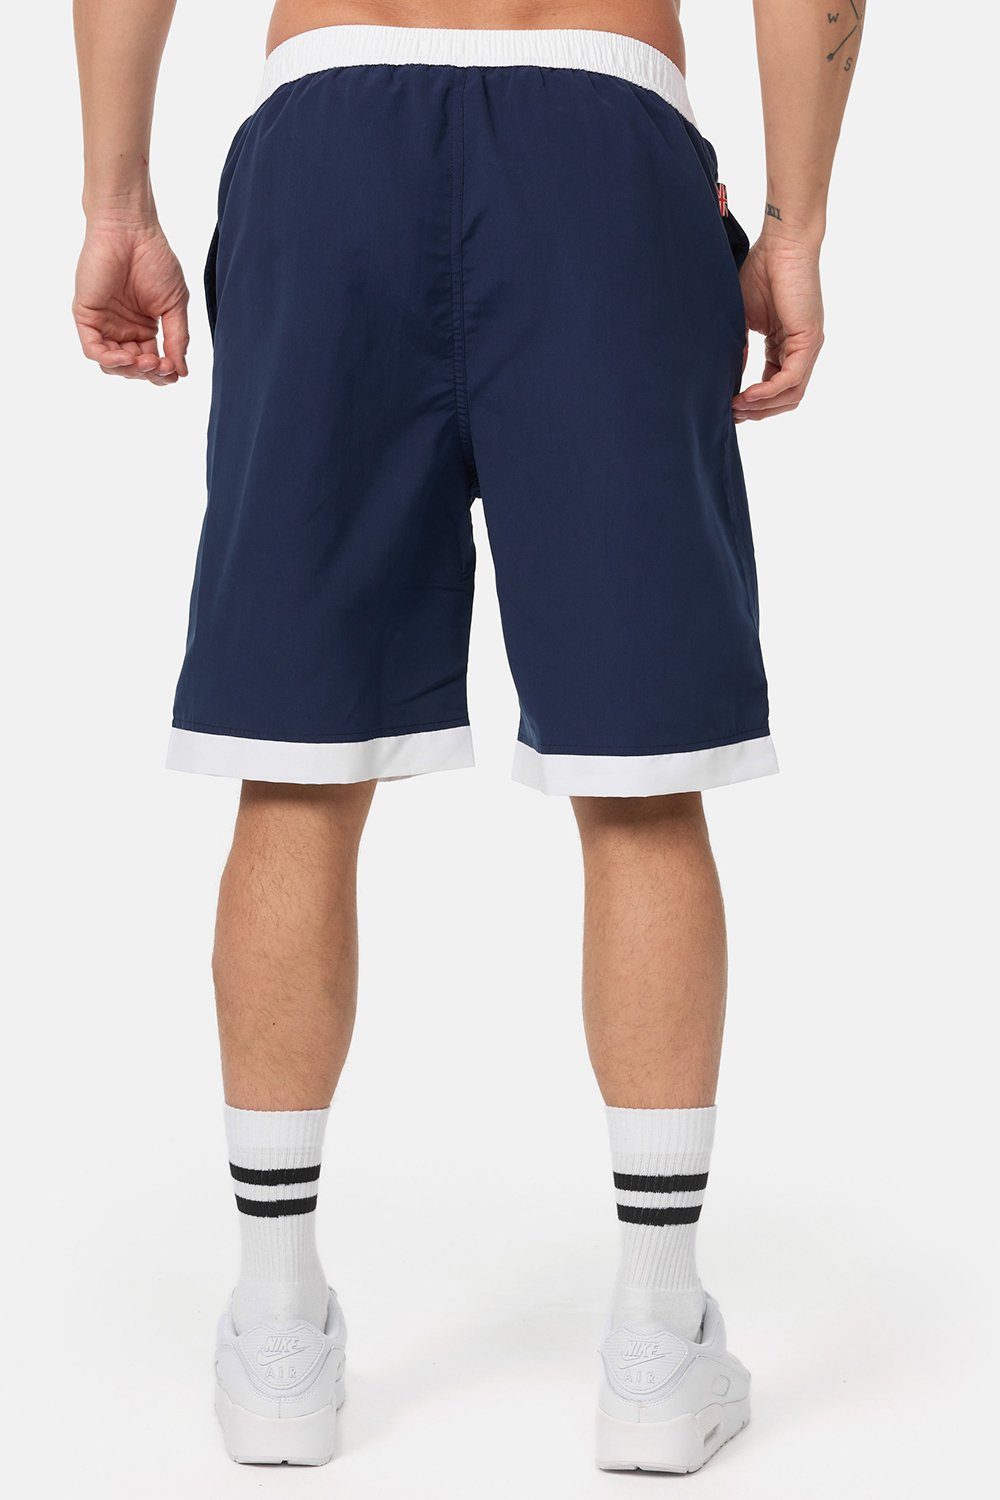 Lonsdale Badehose CLENNELL Navy/White